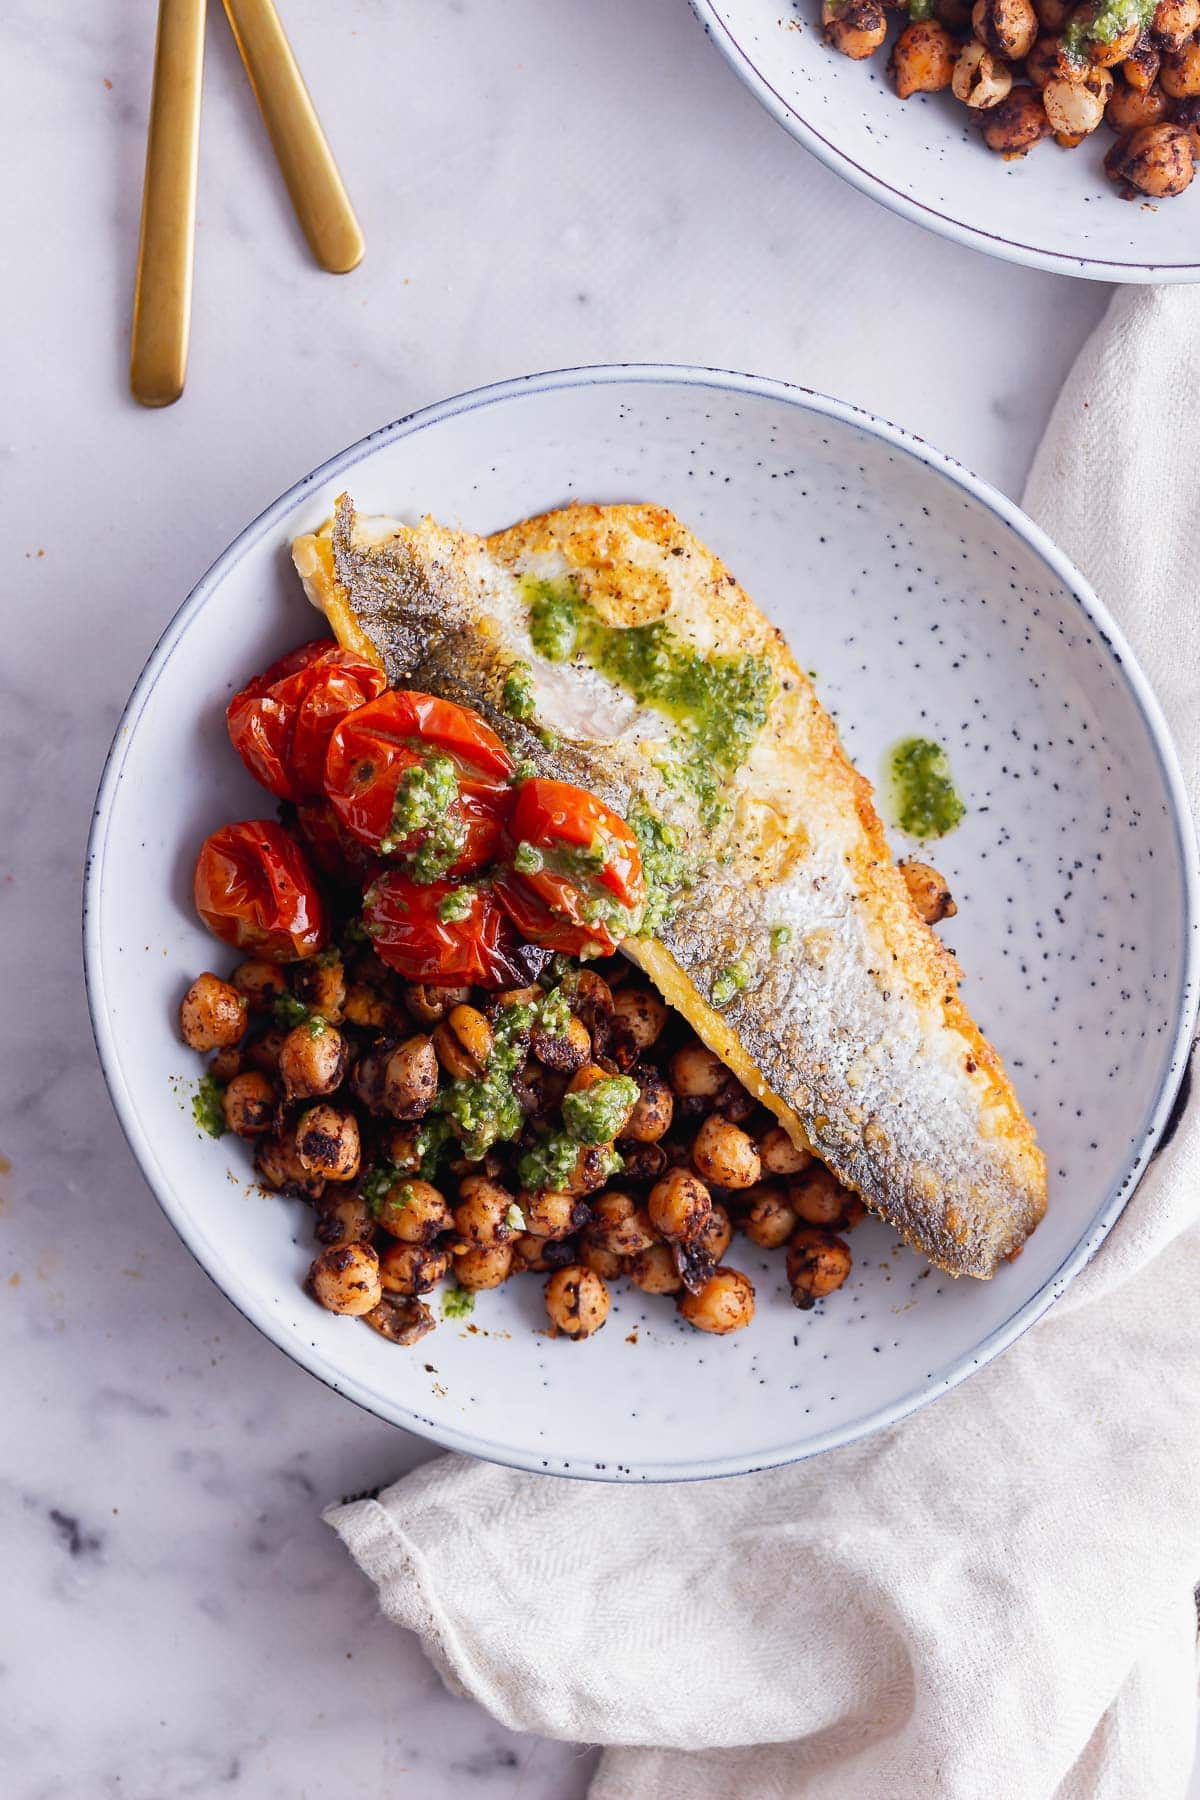 Overhead shot of fried sea bass and chickpeas in a blue bowl